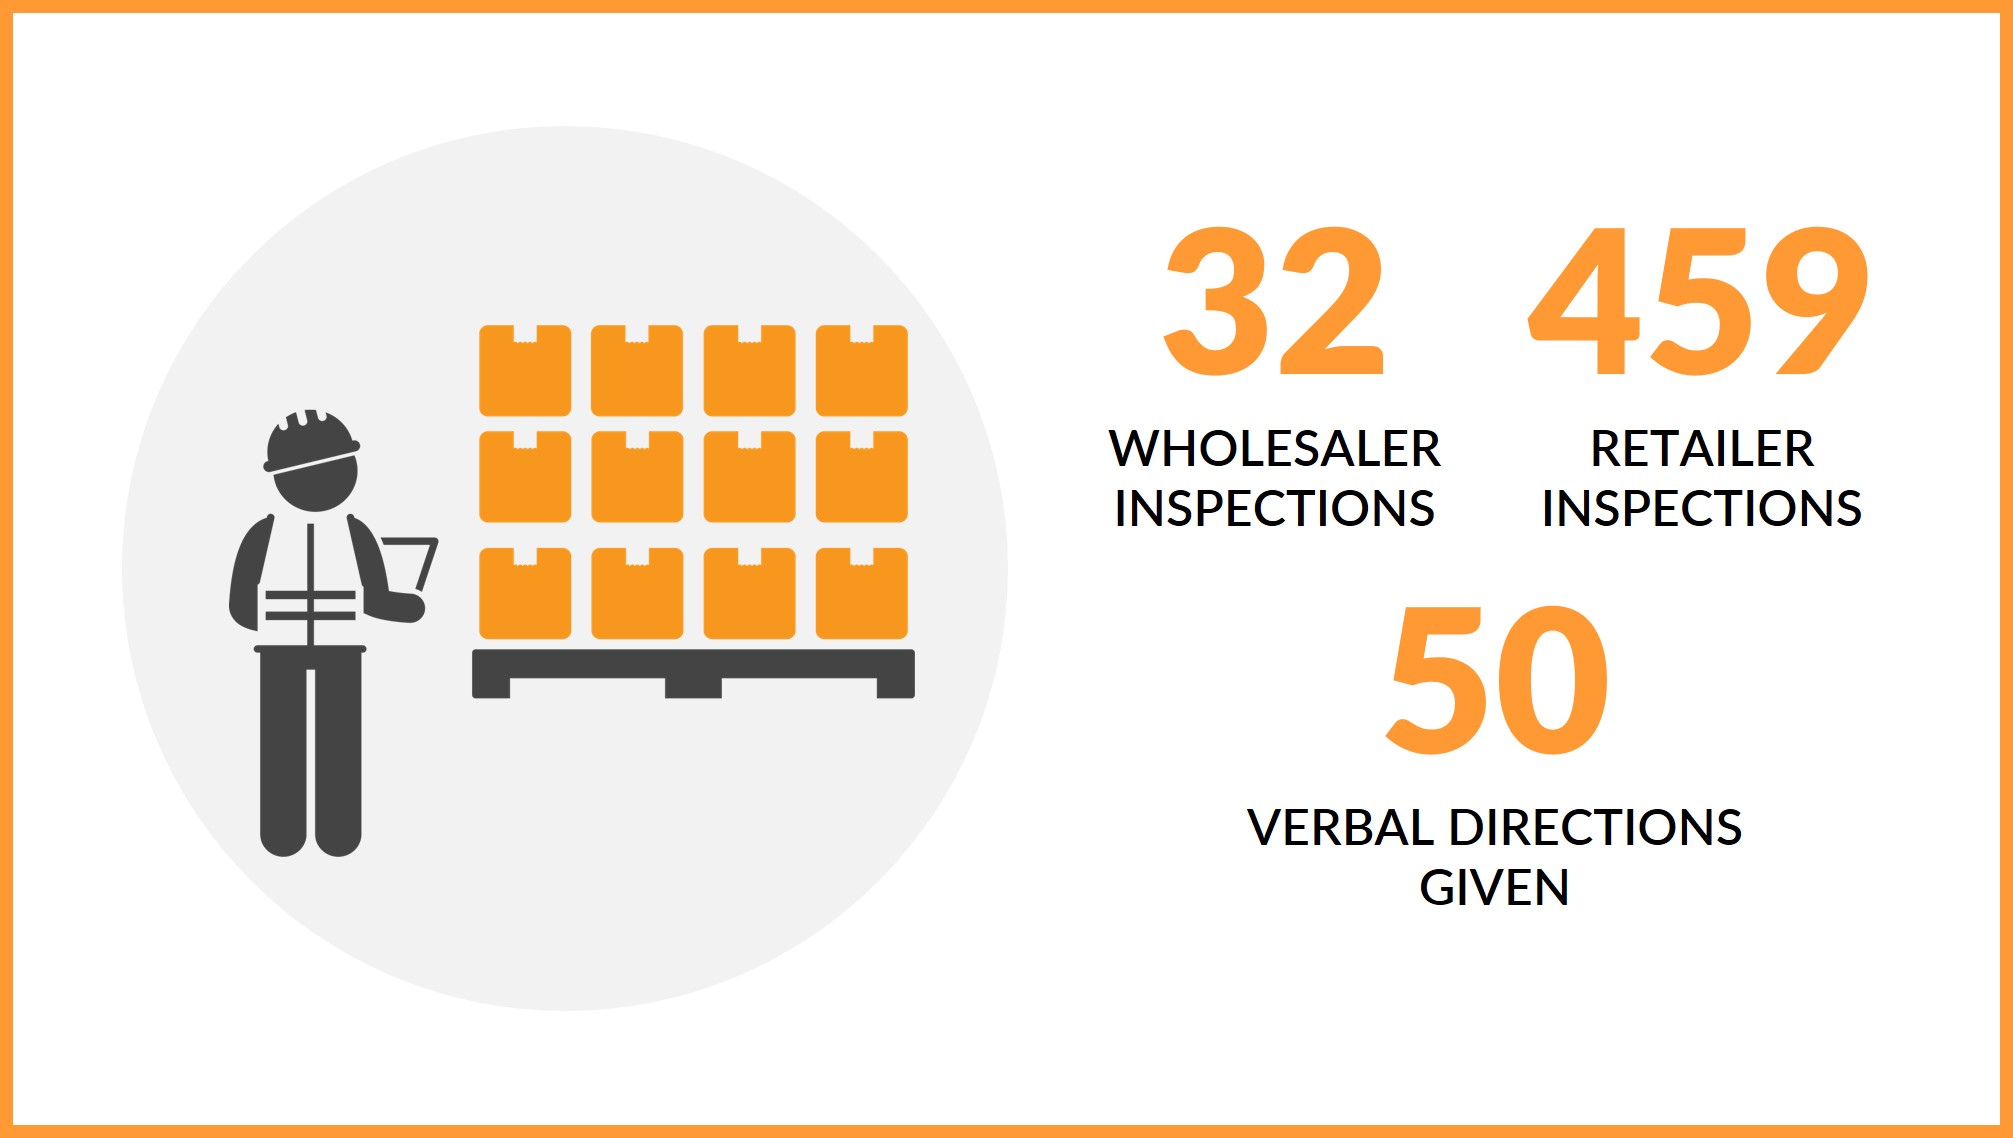 The image shows the number of wholesaler and retailer inspections, including verbal directions given by NT WorkSafe during Territory Day inspections. 